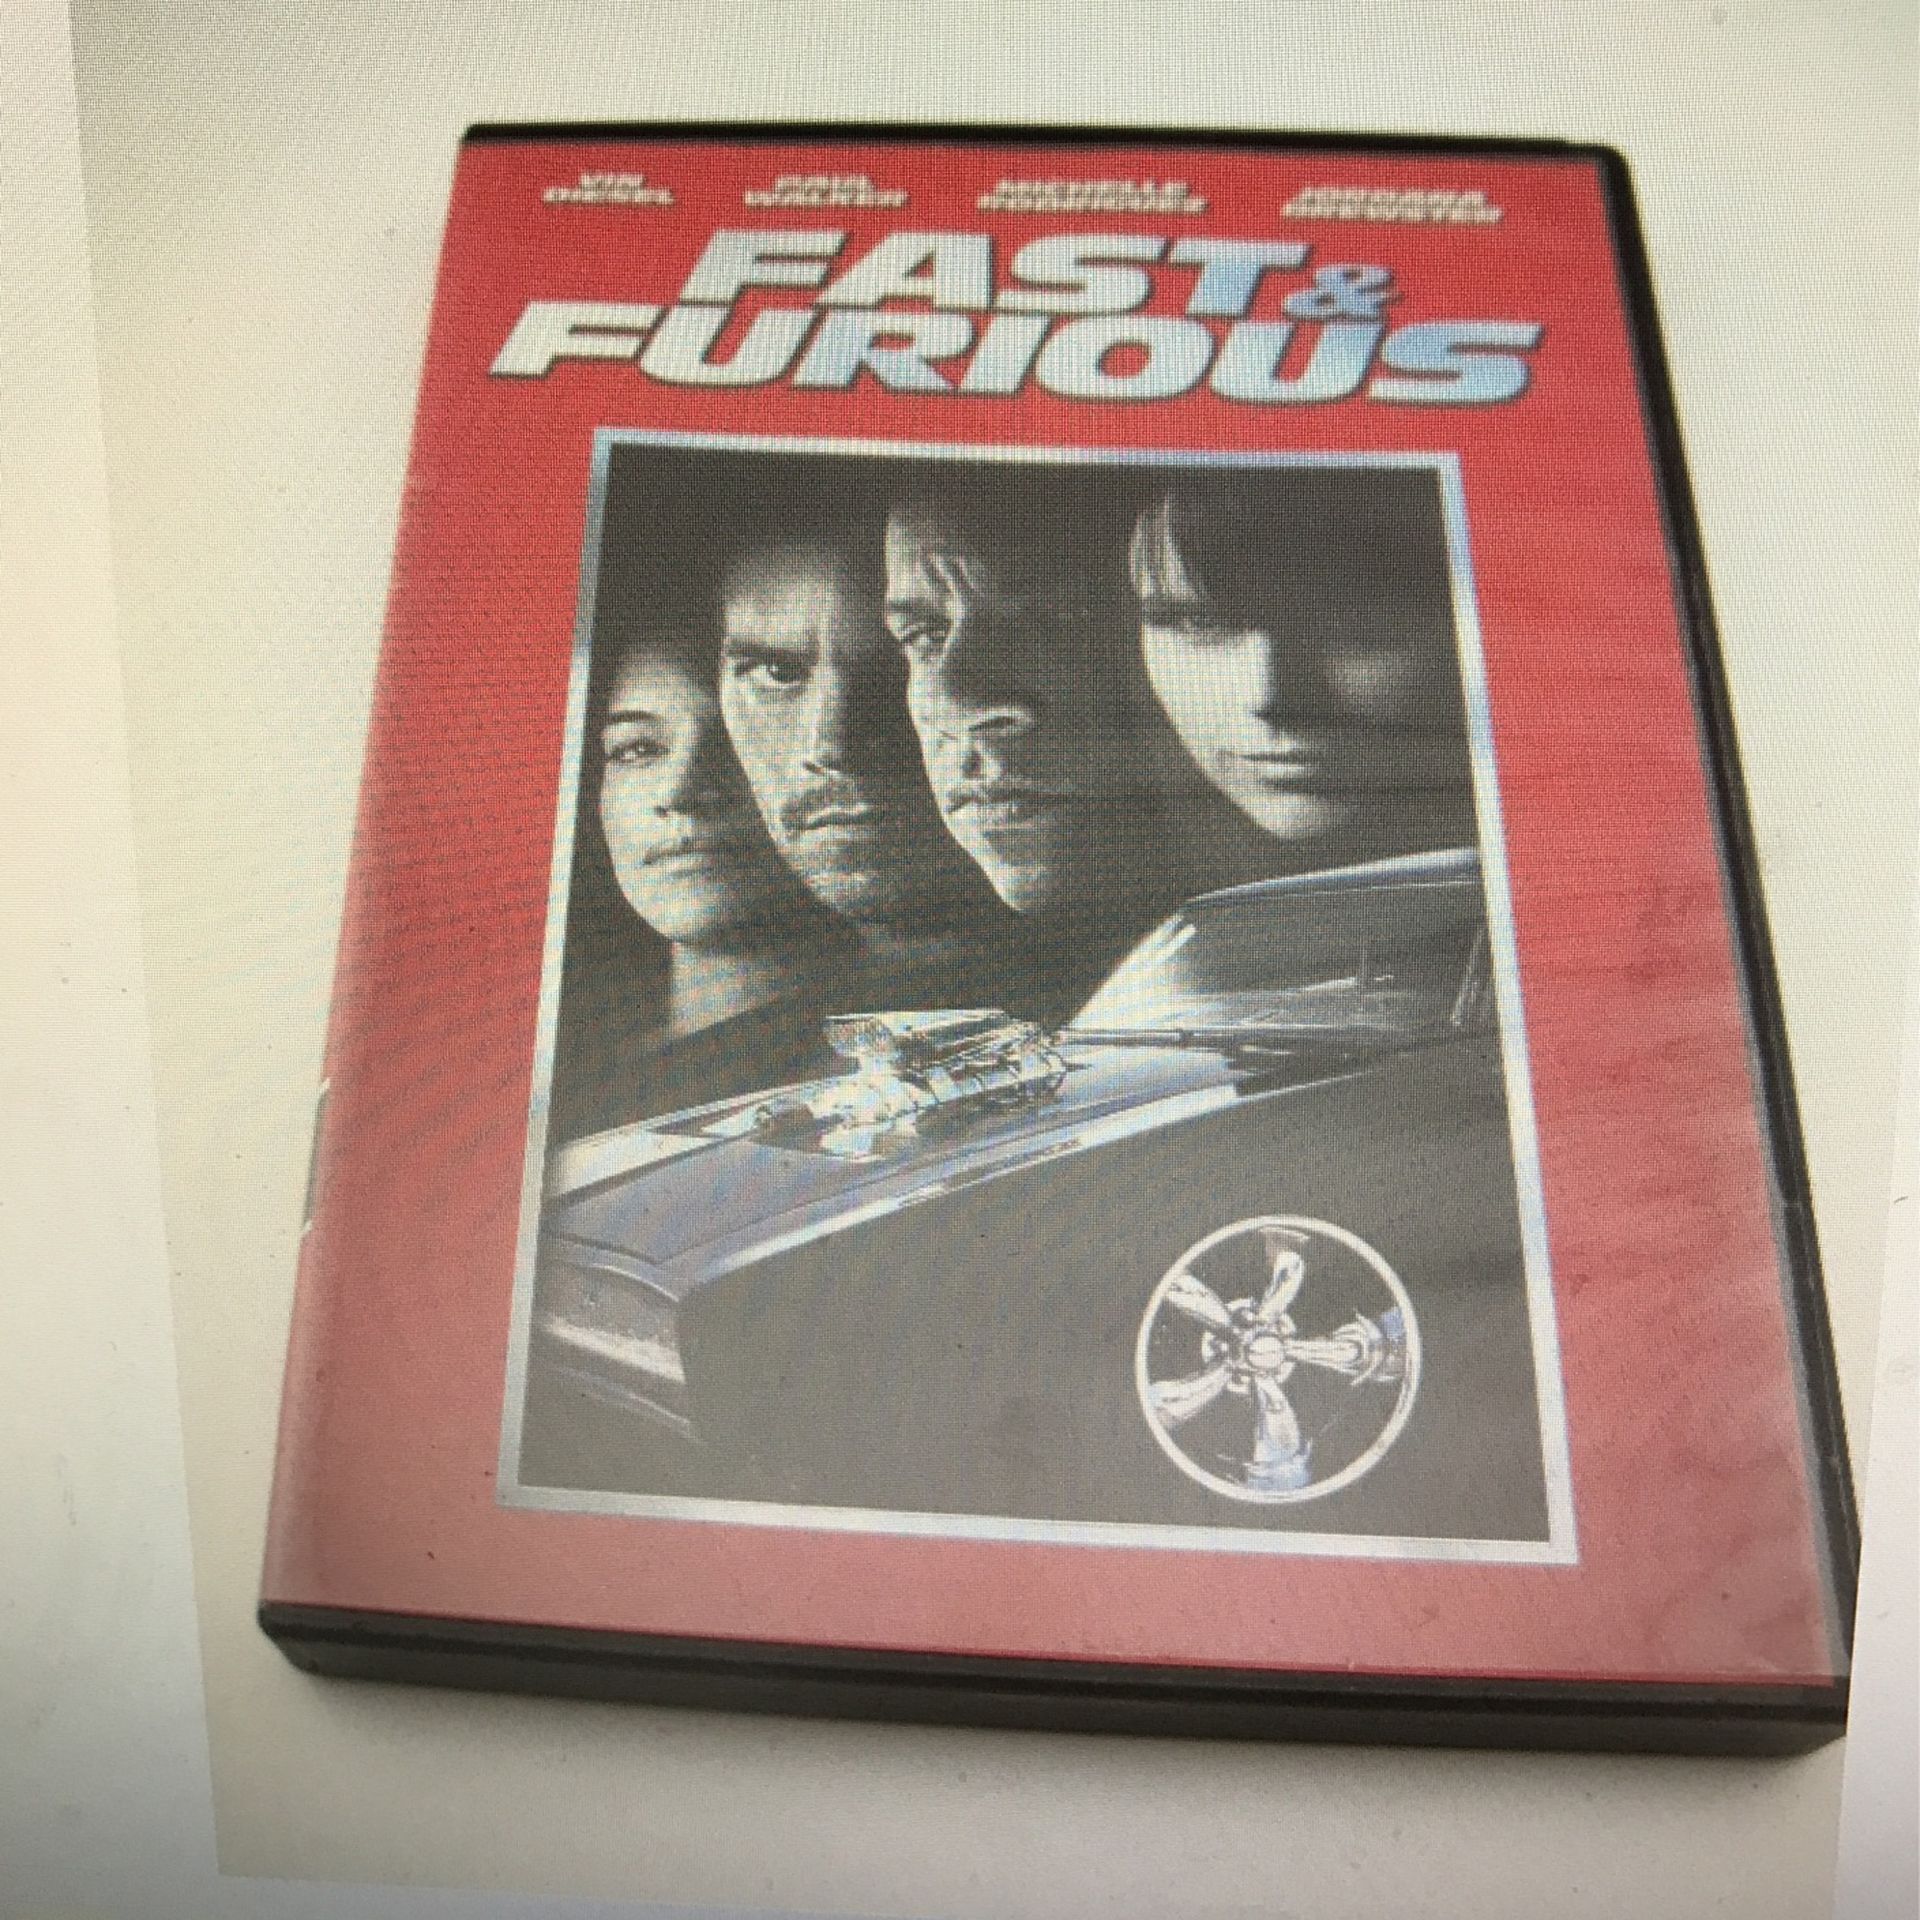 Fast and Furious (DVD Movie) (widescreen) (Universal) (Justin Lin) (PG-13)